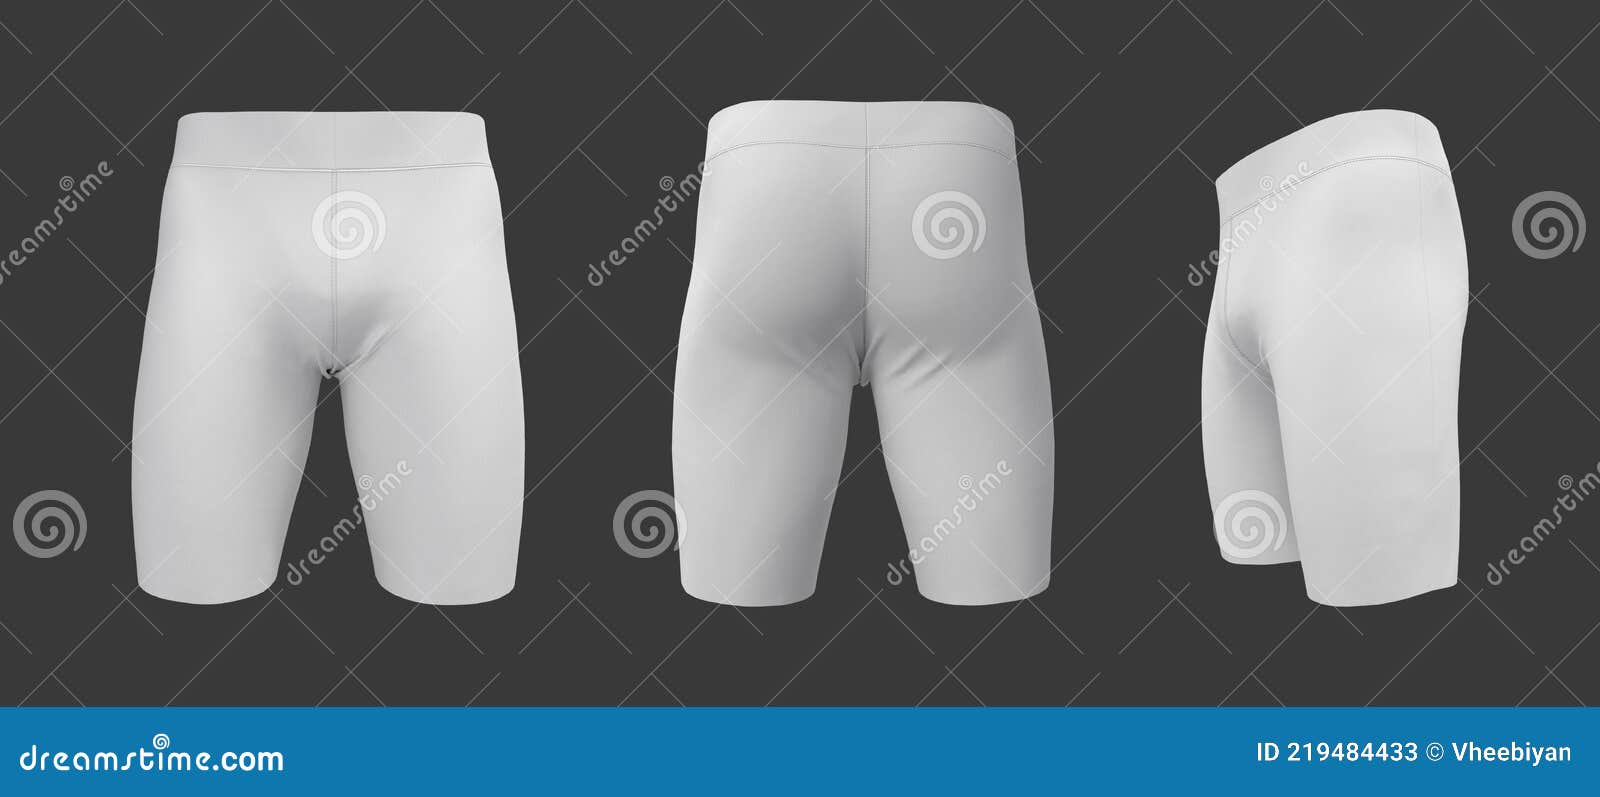 waisted shorts mockup in front, side and back views